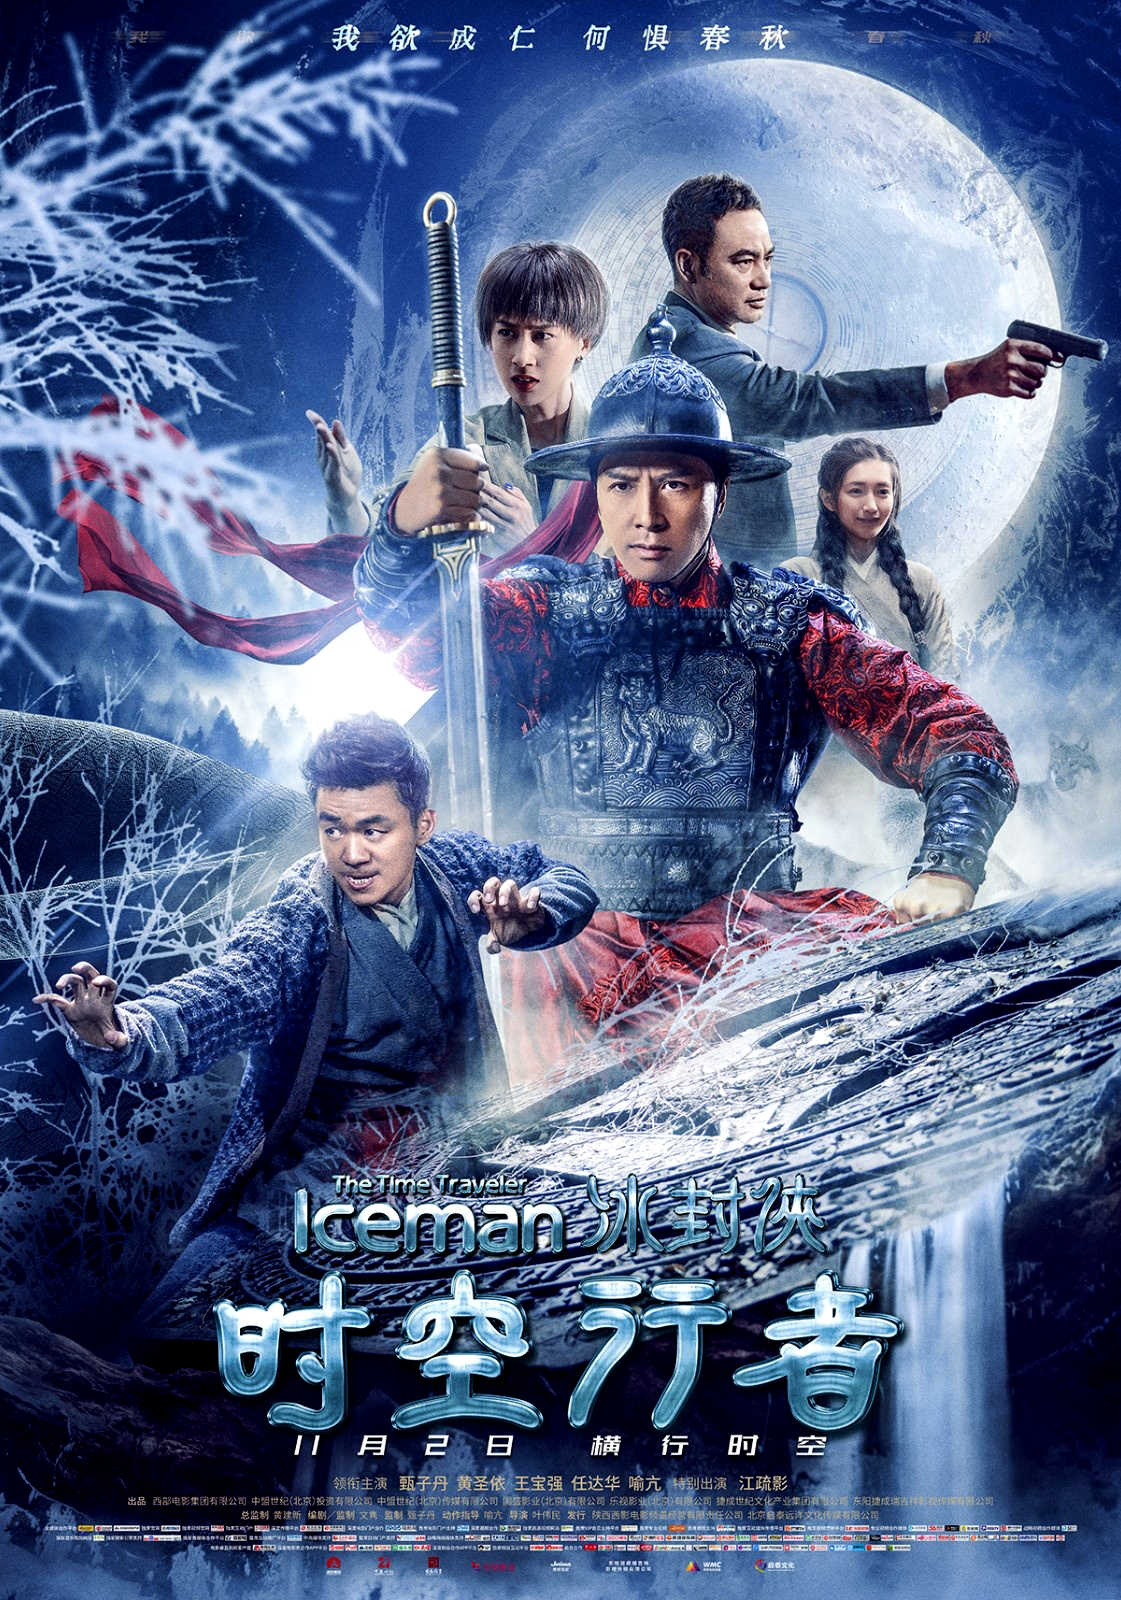 Iceman: The Time Traveller (2018) [Chinese] Mp4 Download